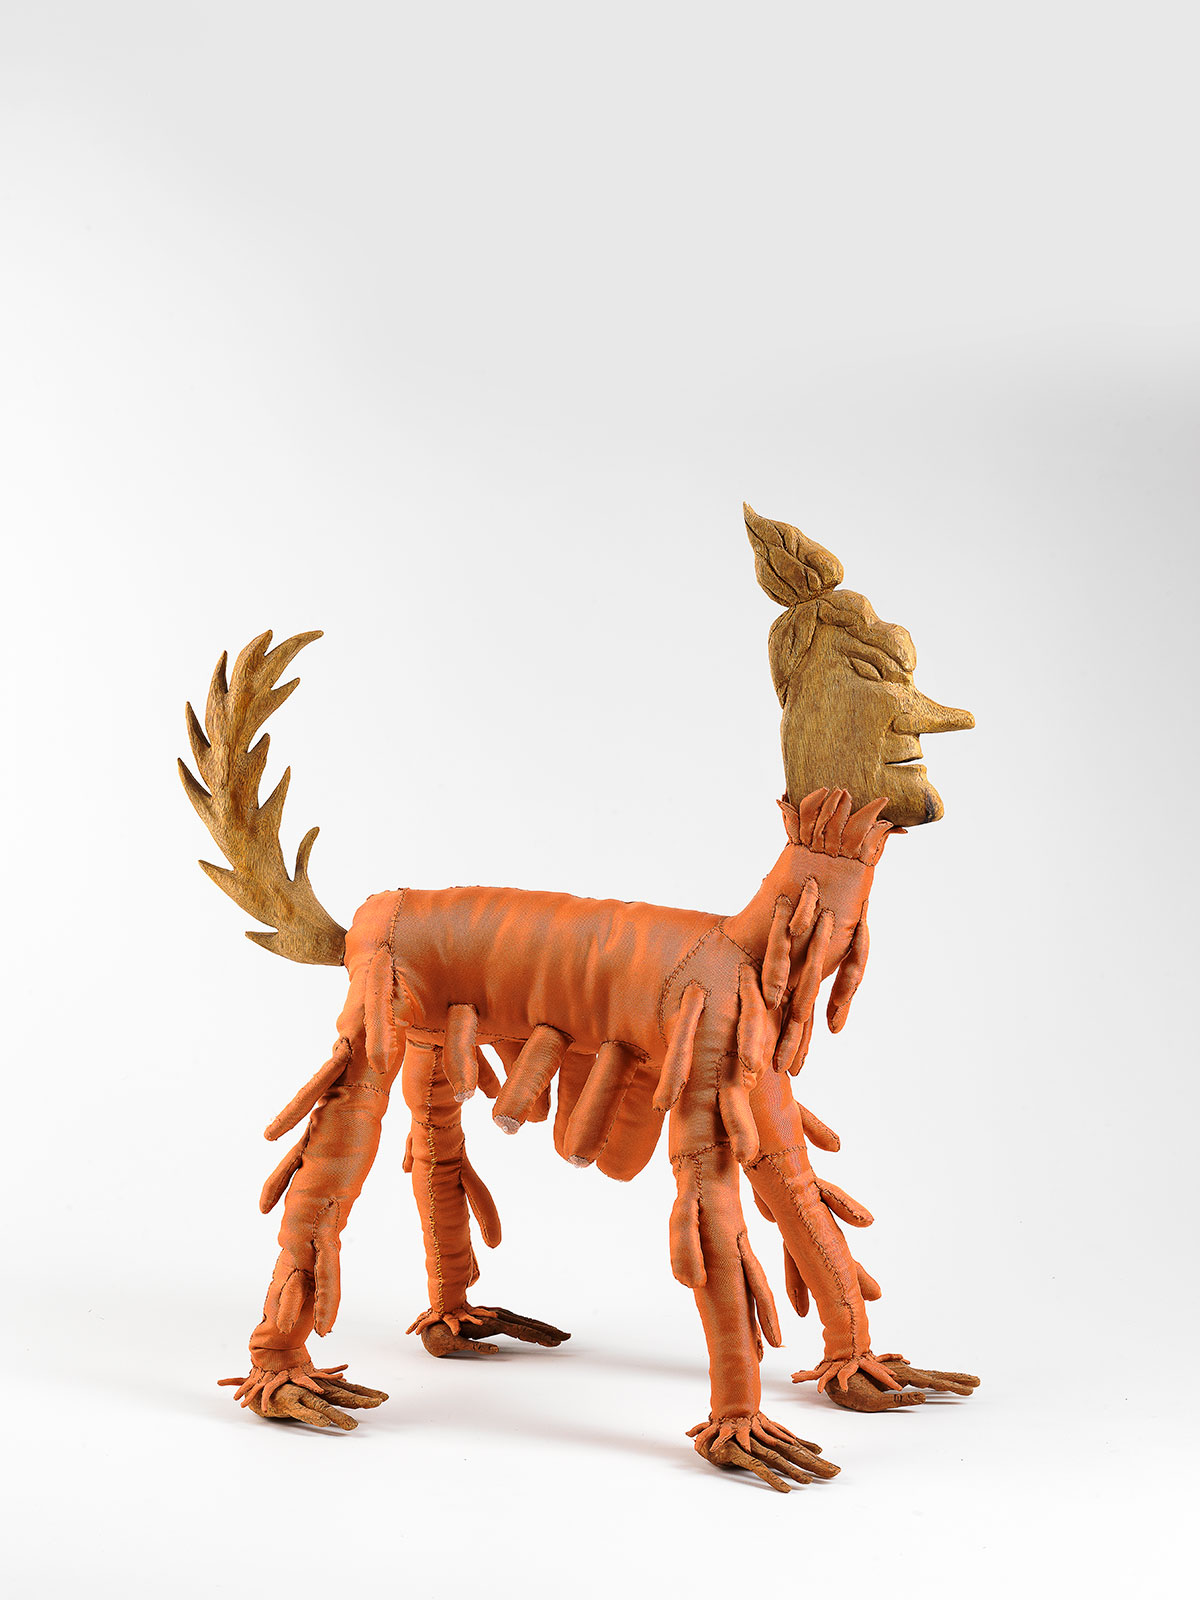 Orange Udder Dog, 2020
African walnut wood, okoumé wood, fabric, 55 x 55 x 29 cm
The Israel Museum, Jerusalem: Purchase, “Here & Now” Contemporary Israeli Art Acquisitions Committee, Israel
Photo © The Israel Museum, Jerusalem, by Elie Posner